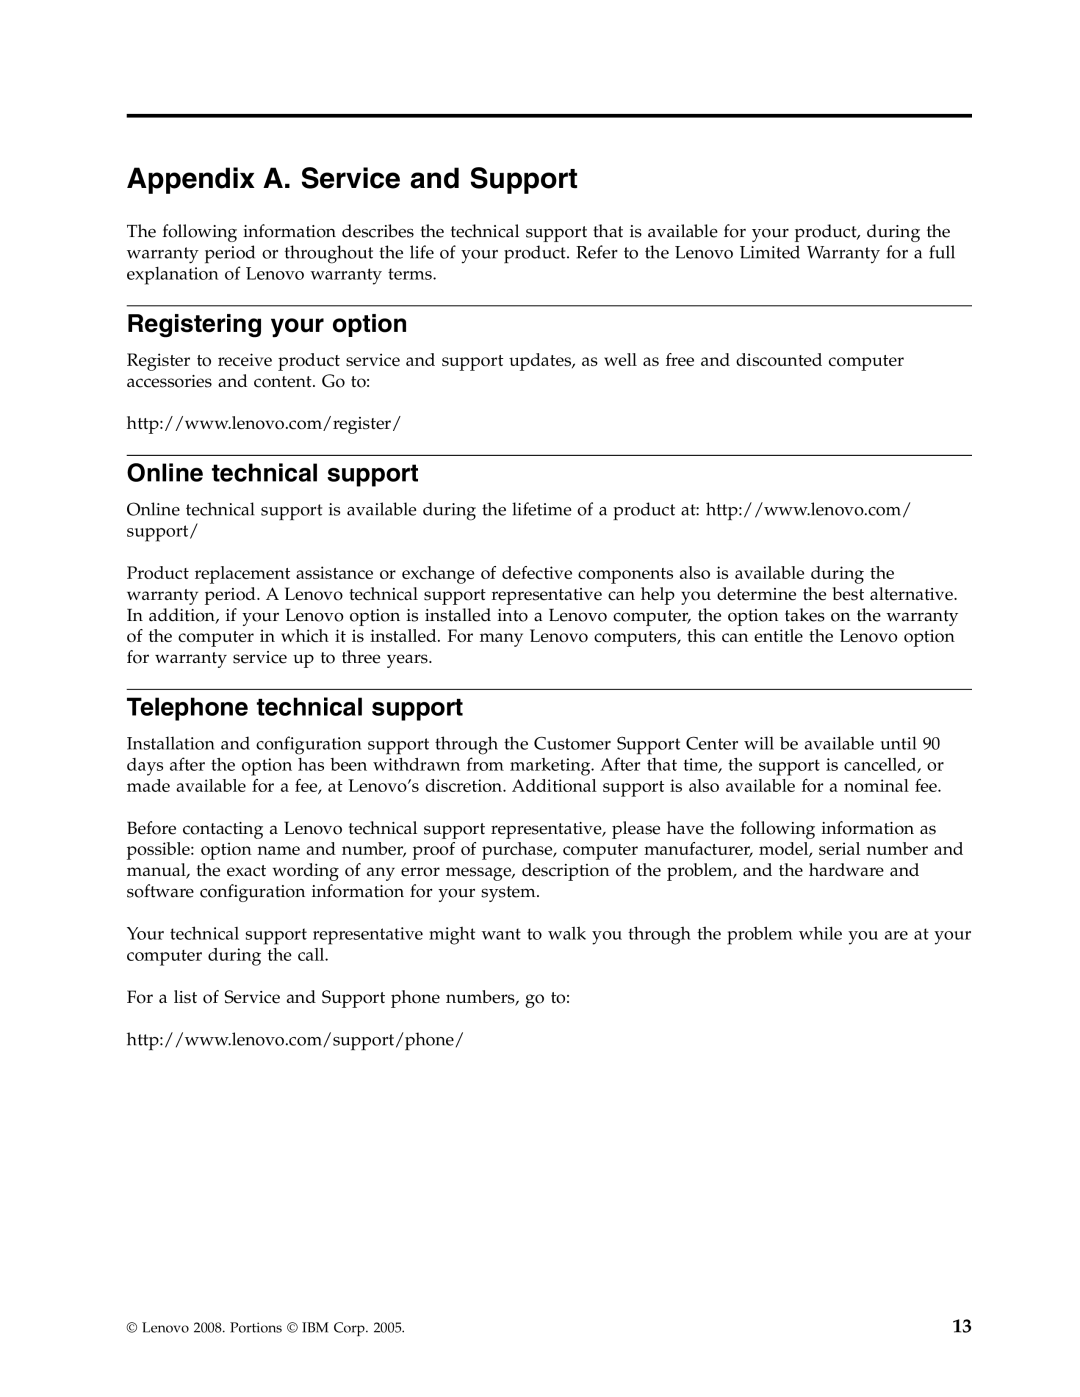 Lenovo 43N3222 manual Appendix A. Service and Support, Registering your option, Online technical support 